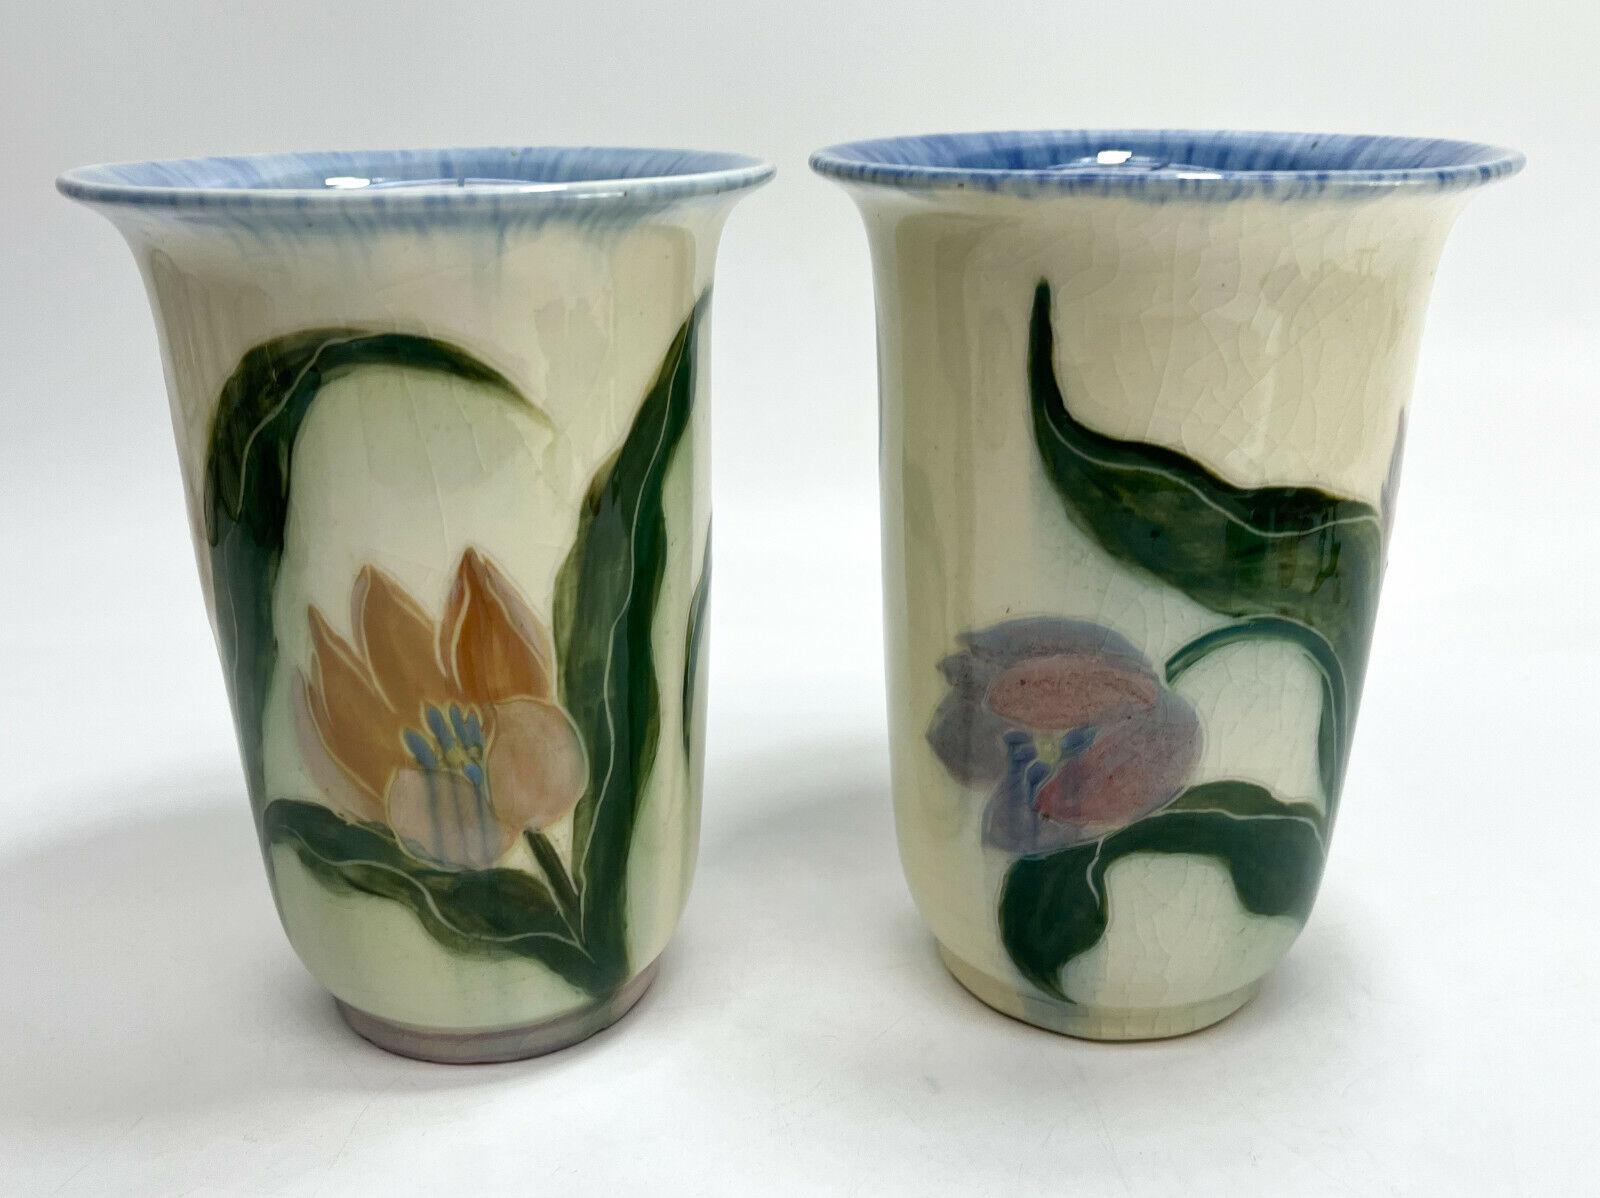 20th Century Pair of Rookwood Pottery Vases by E.T. Hurley #6806, Hand Painted Tulips, 1943 For Sale